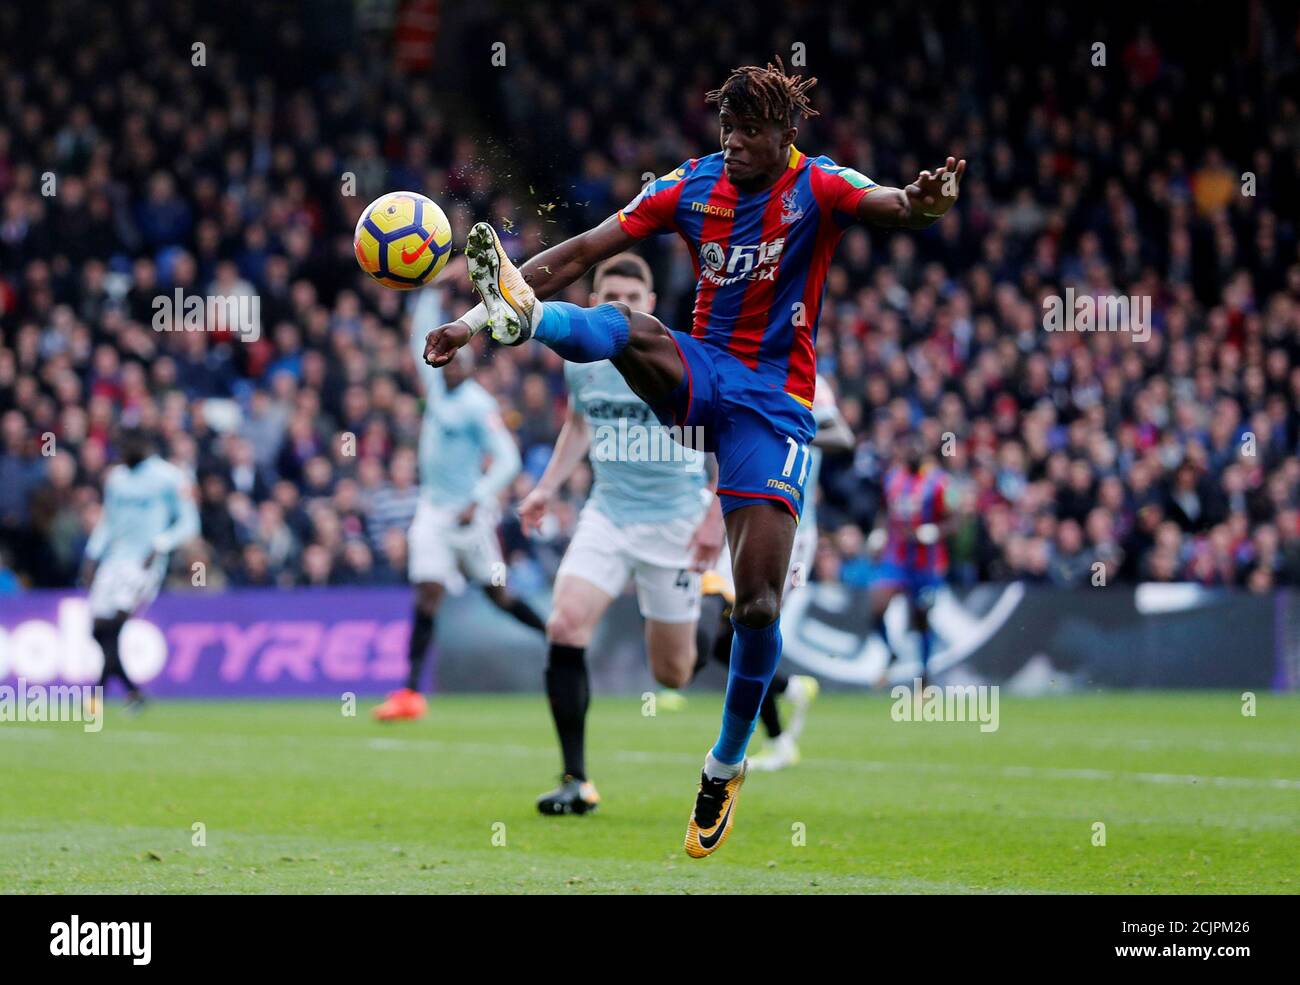 Soccer Football - Premier League - Crystal Palace vs West Ham United - Selhurst Park, London, Britain - October 28, 2017   Crystal Palace's Wilfried Zaha in action   REUTERS/Eddie Keogh    EDITORIAL USE ONLY. No use with unauthorized audio, video, data, fixture lists, club/league logos or 'live' services. Online in-match use limited to 75 images, no video emulation. No use in betting, games or single club/league/player publications. Please contact your account representative for further details.? Stock Photo